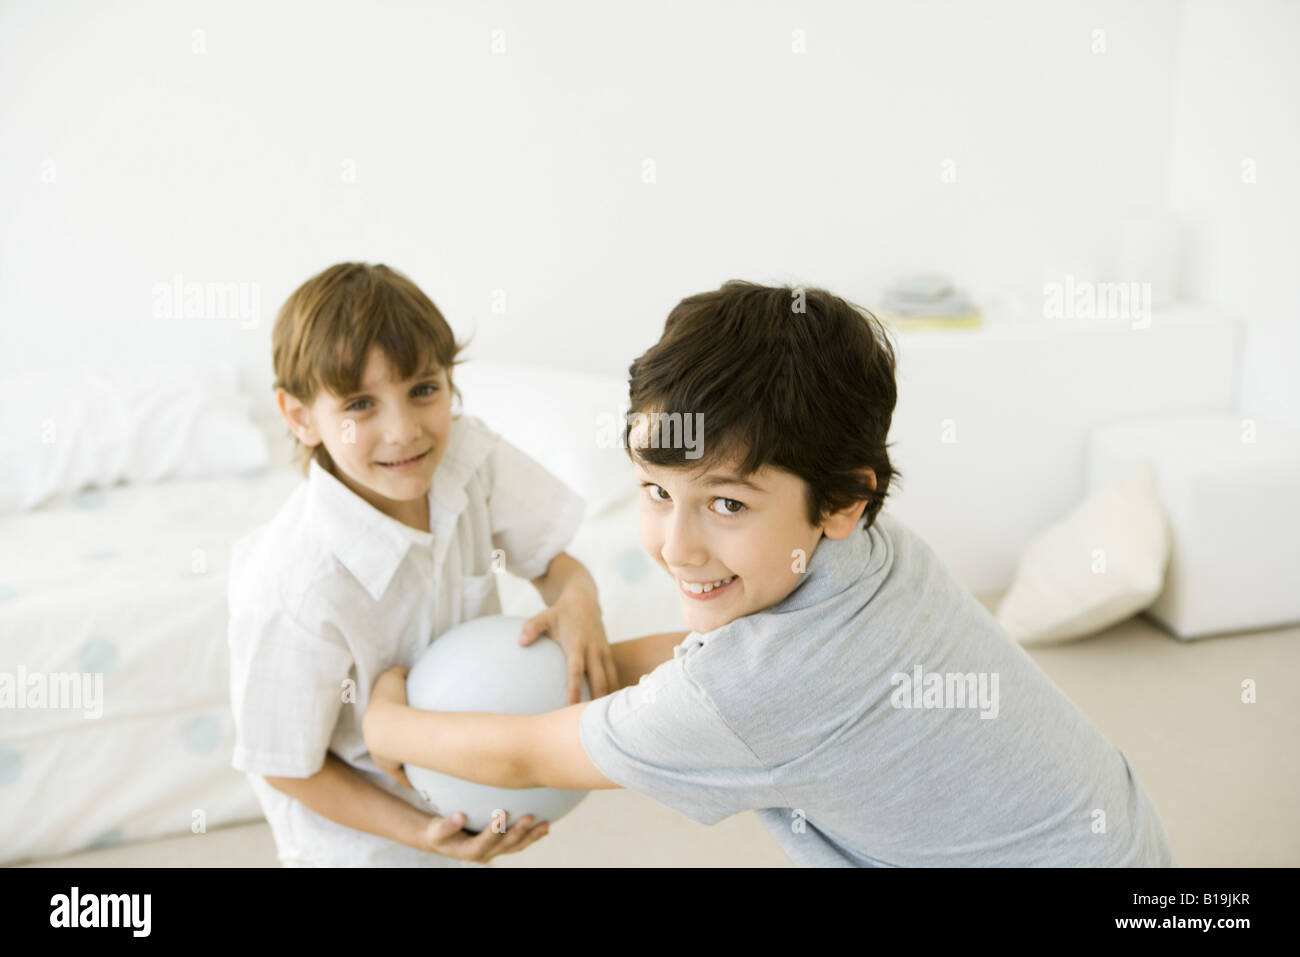 Two boys playing with ball, smiling at camera Stock Photo